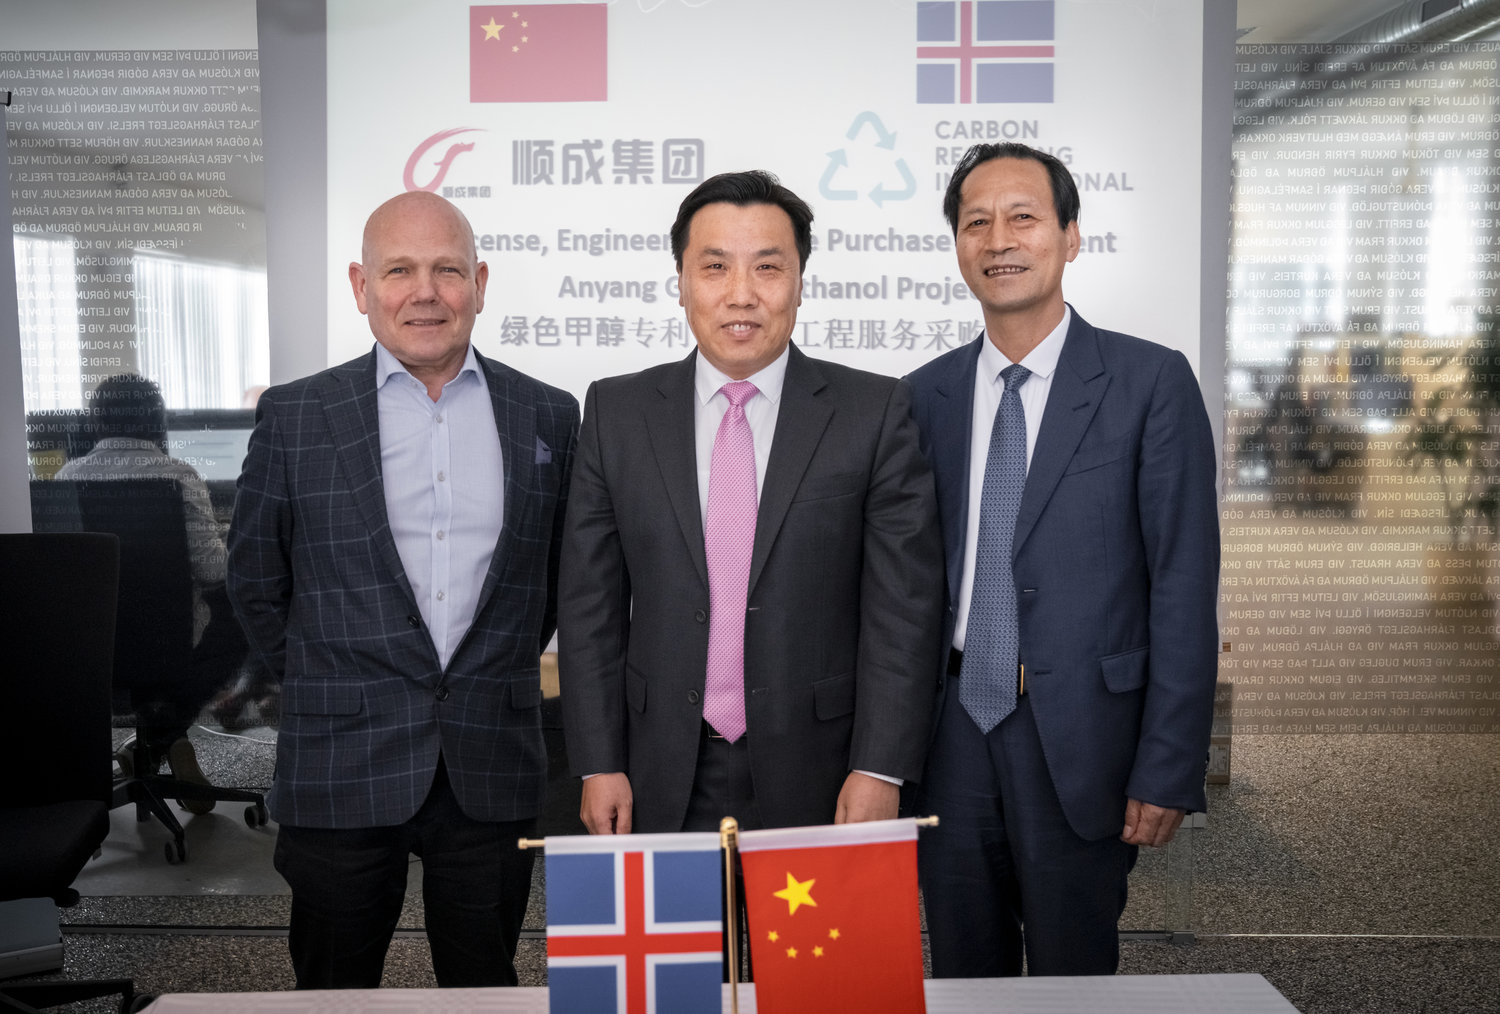 Sindri Sindrason, Chief Executive Officer of CRI (left) and Xinshun Wang, President of Shuncheng Group (right) signed the agreement with Jin Zhijian, ambassador of the Peopleâs Republic of China to Iceland in attendance.